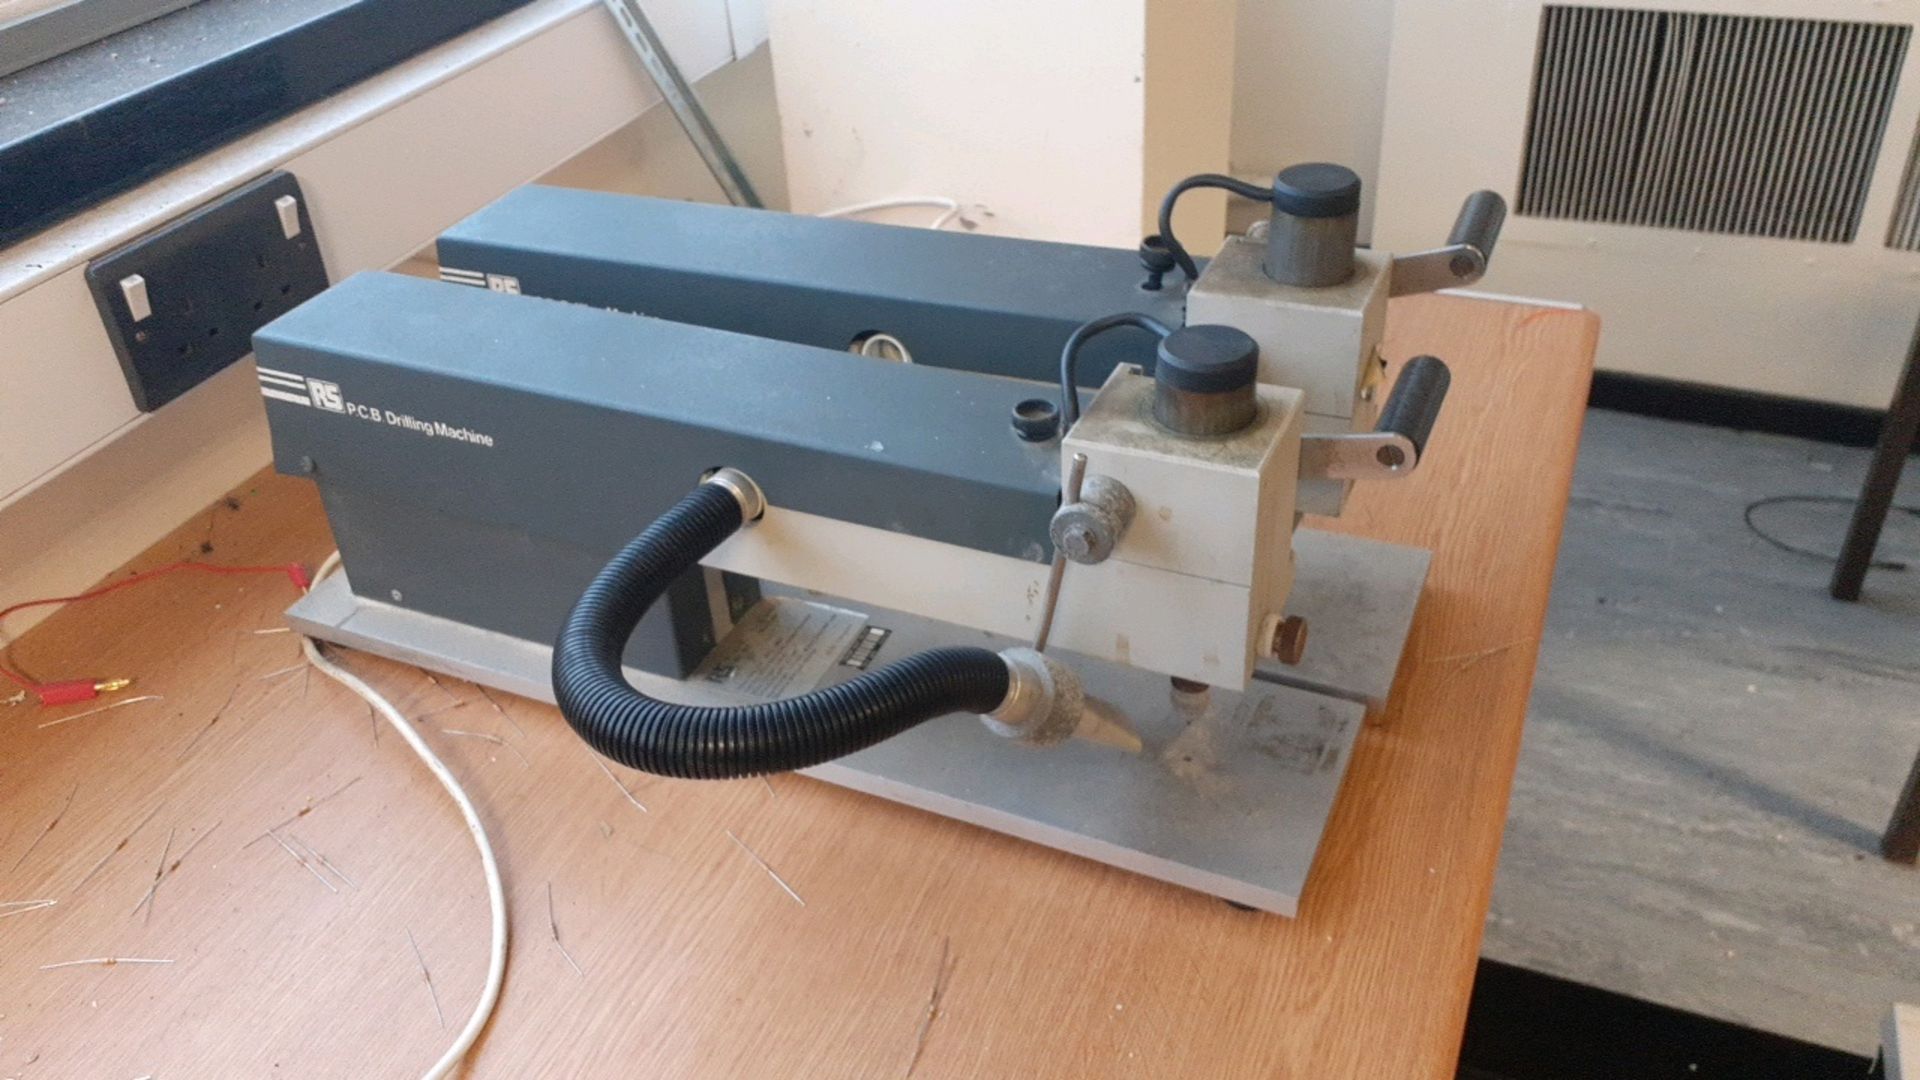 PCB drilling machines - Image 2 of 2